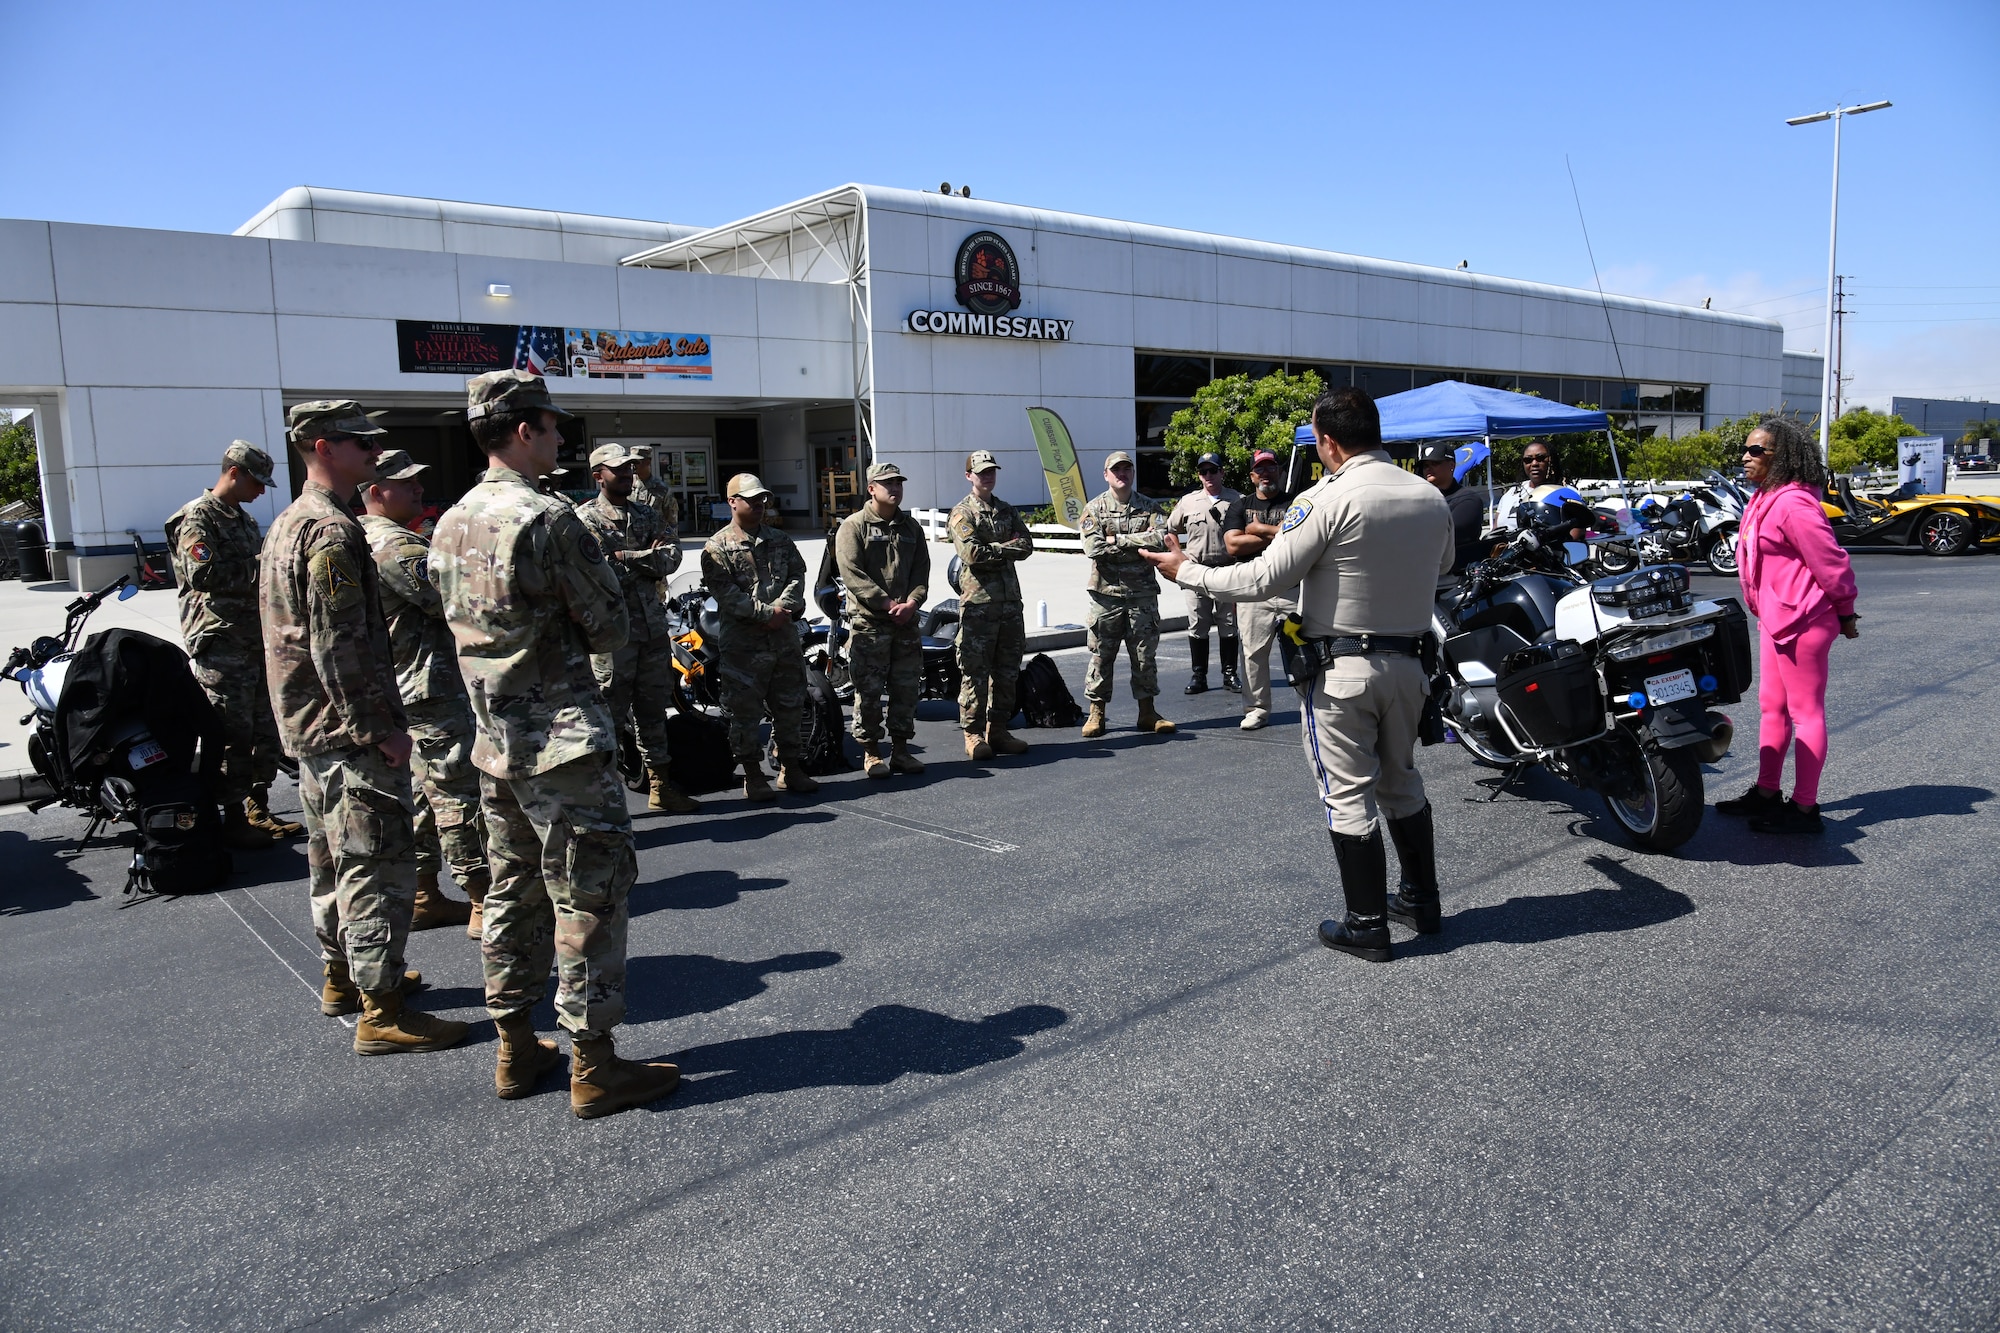 Officer Sepulveda from the California Highway Patrol provides opening remarks for the annual motorcycle safety awareness day at Los Angeles Air Force Base in the Commissary parking lot.,